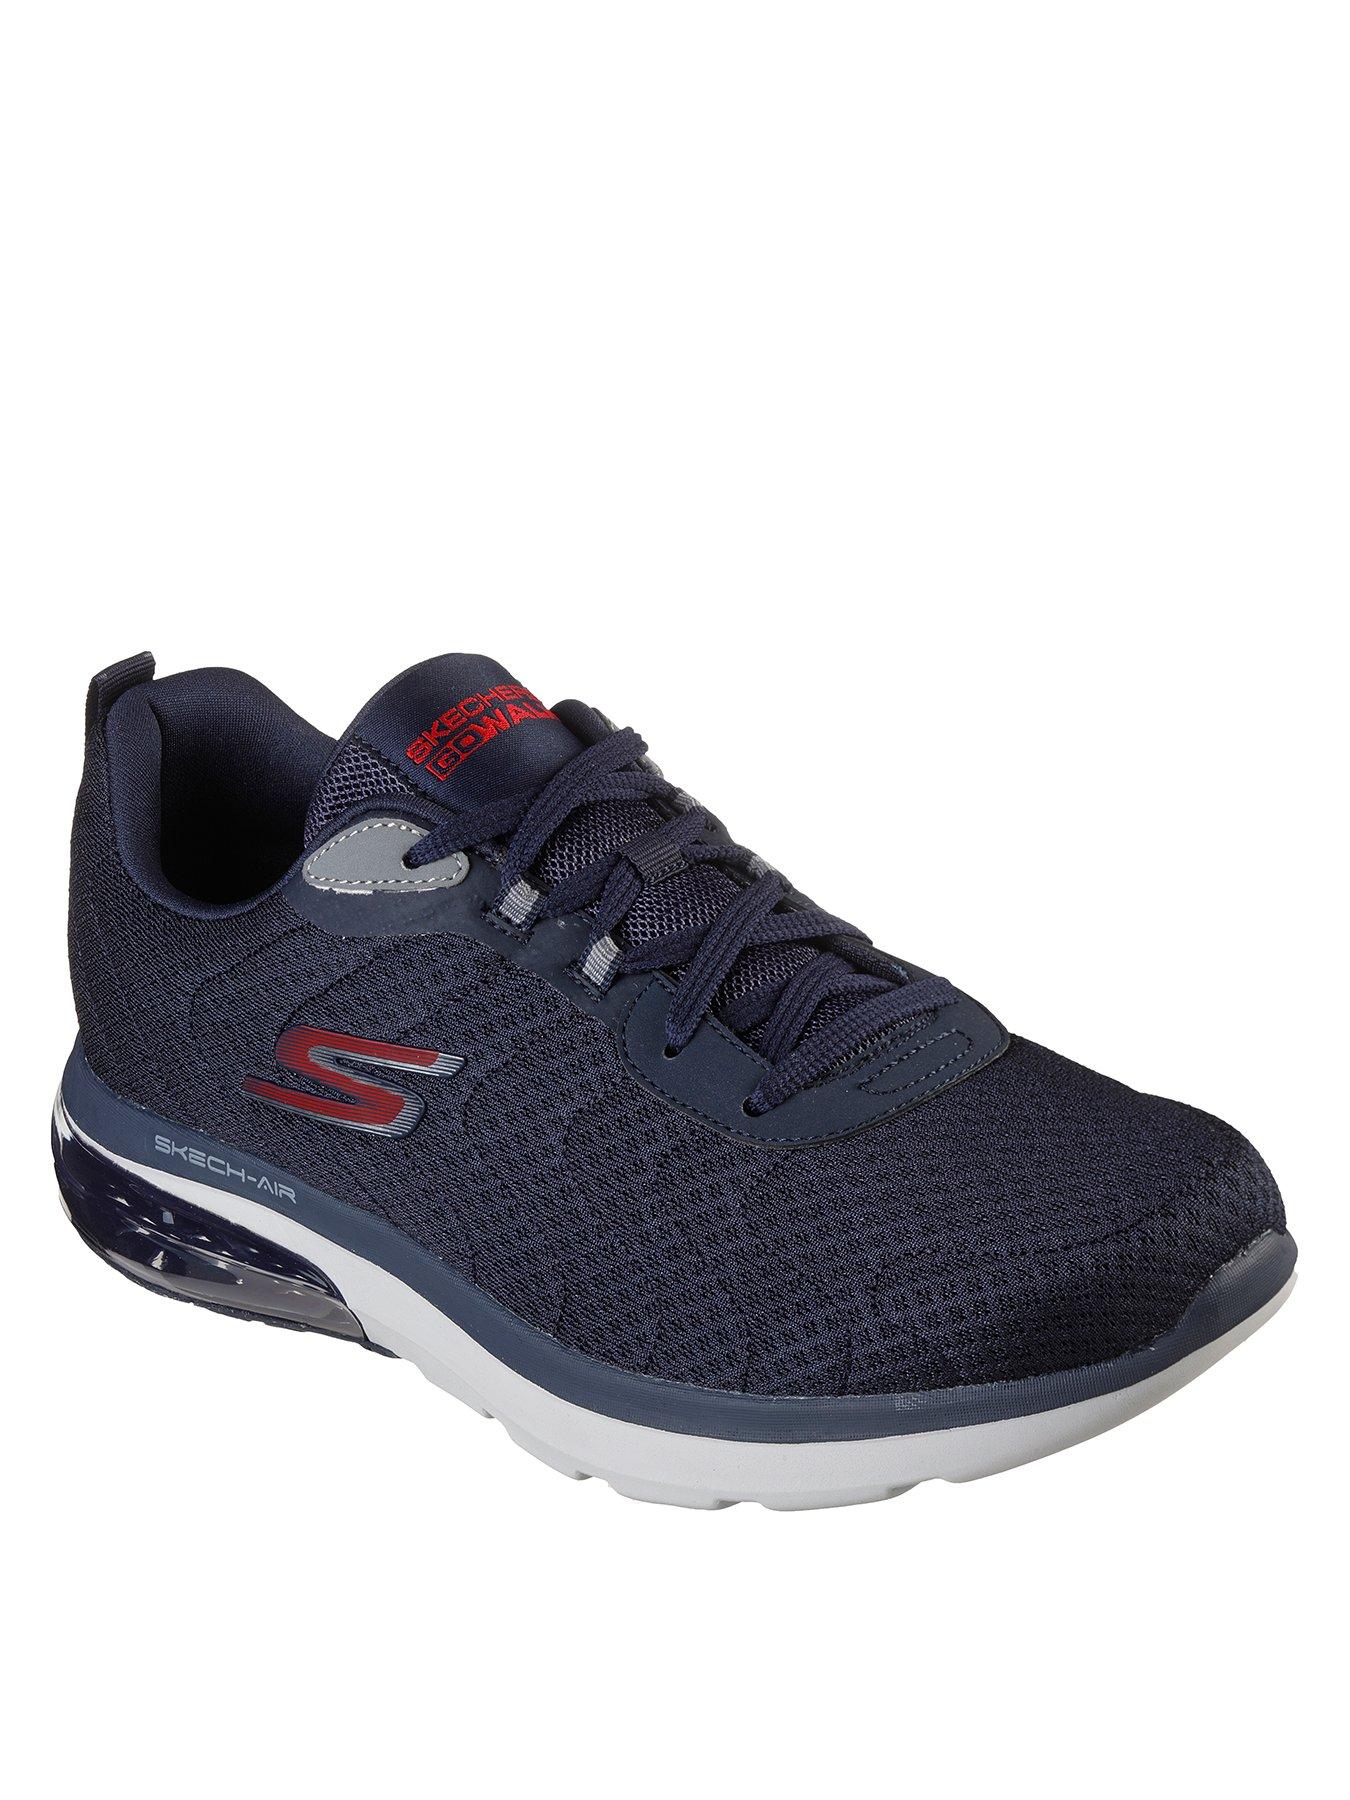 Trainers Skech-air Mesh Lace Up Trainer